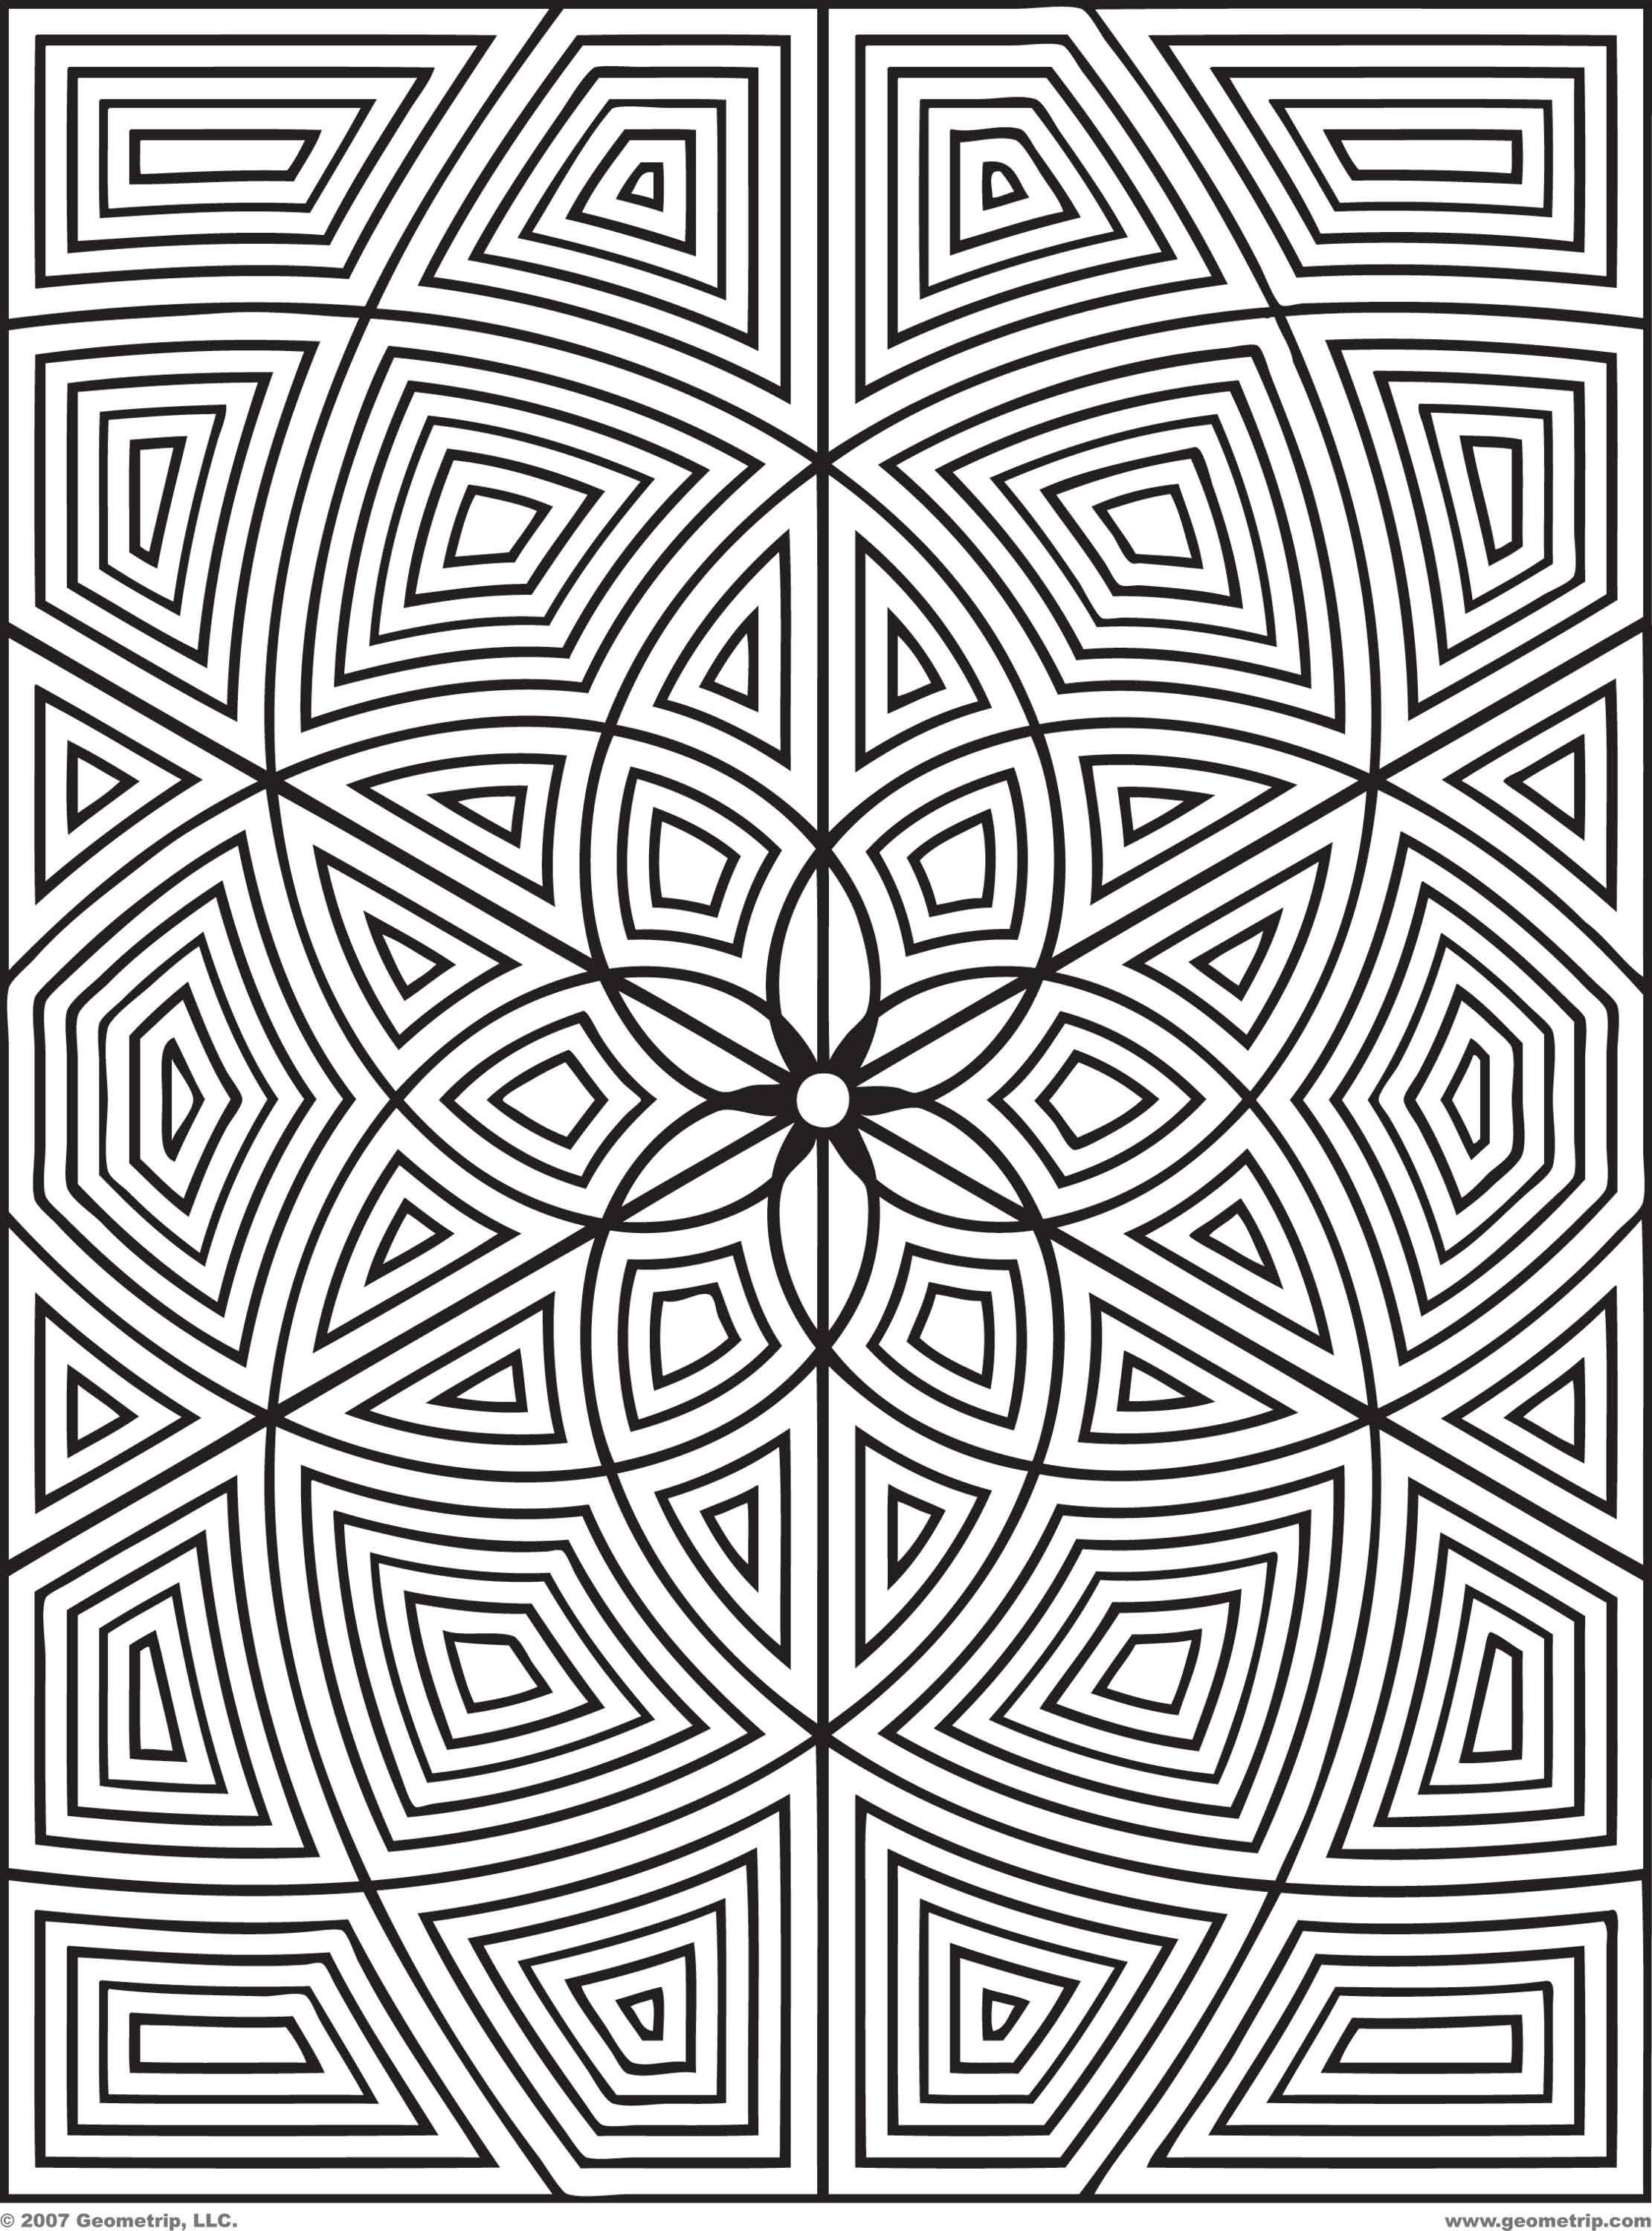 Geometric Coloring Pages To Print - Coloring Style Pages